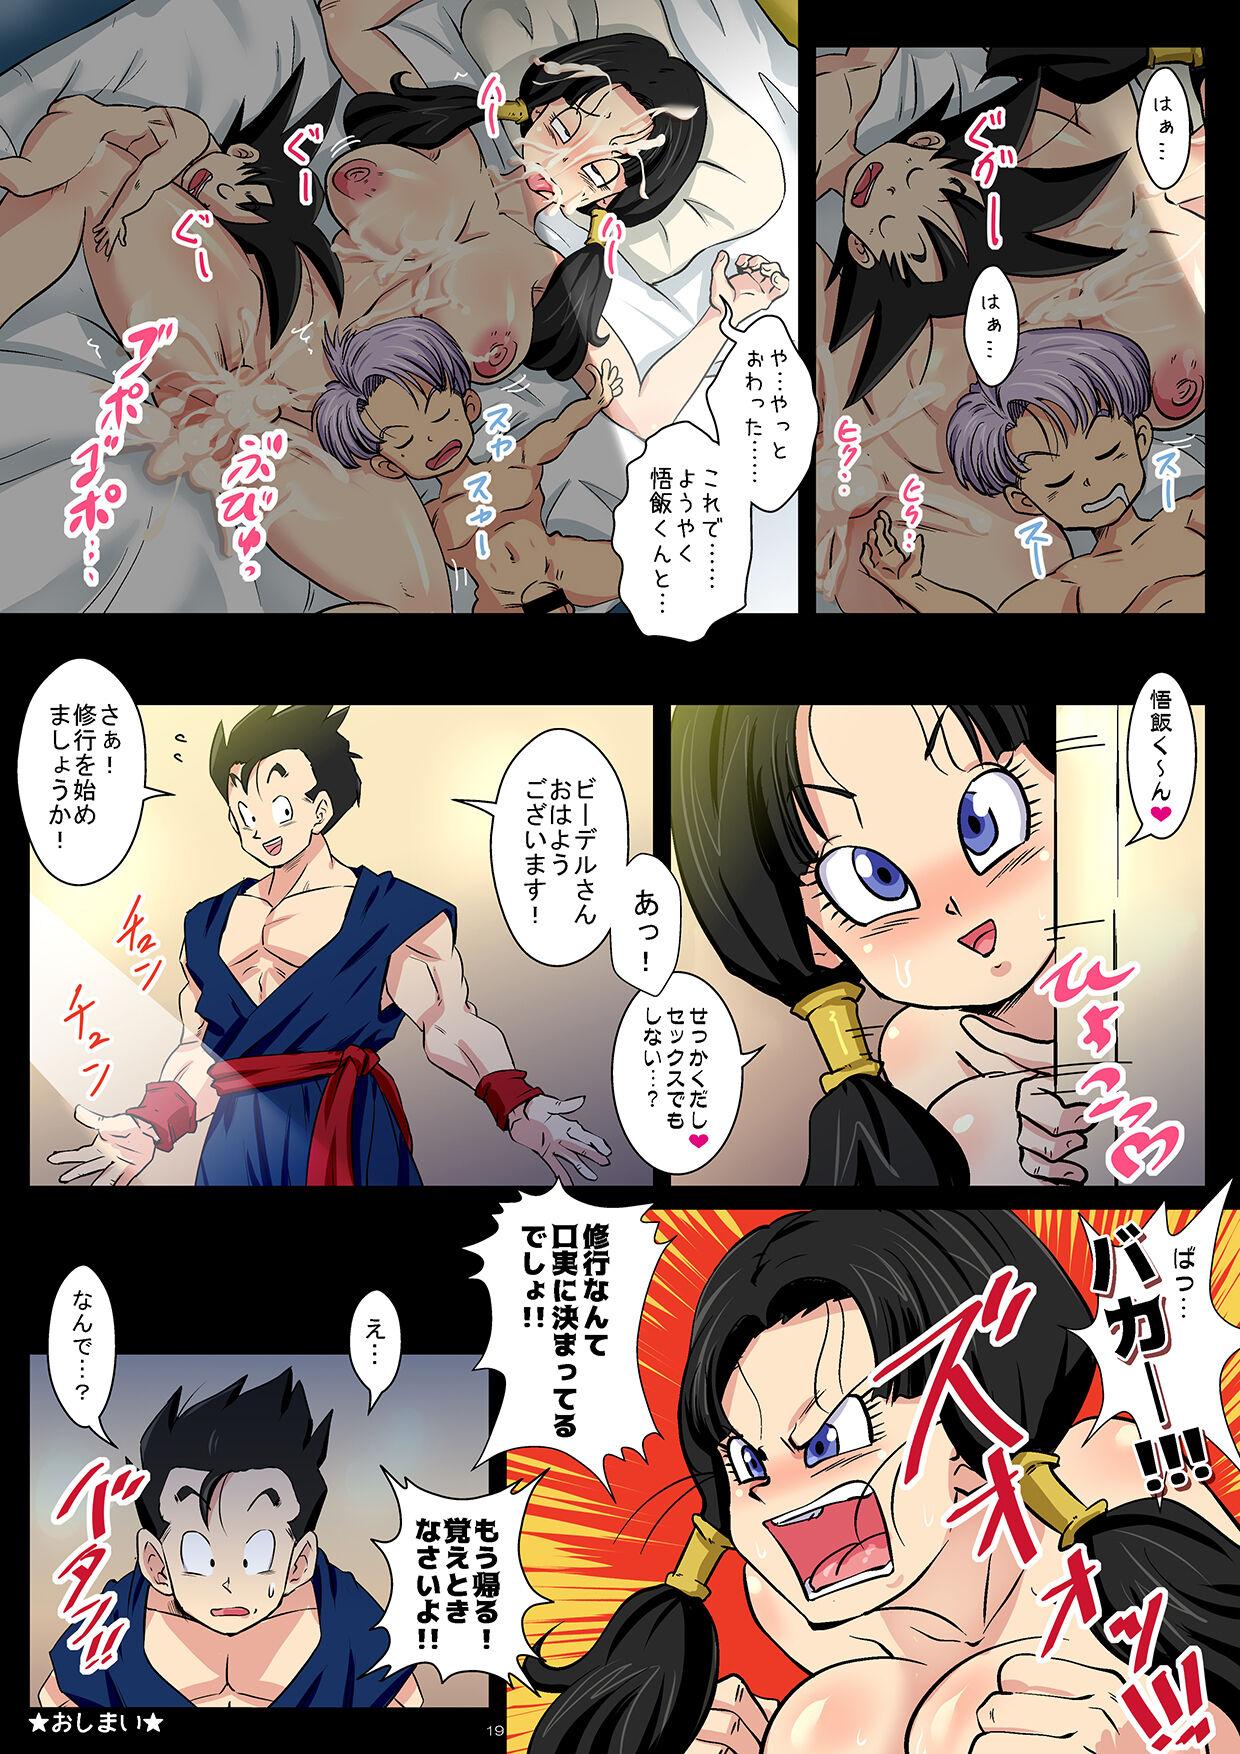 Sloppy Blow Job Gohan is addicted to sex with Chi Chi - Dragon ball z Solo Girl - Page 19